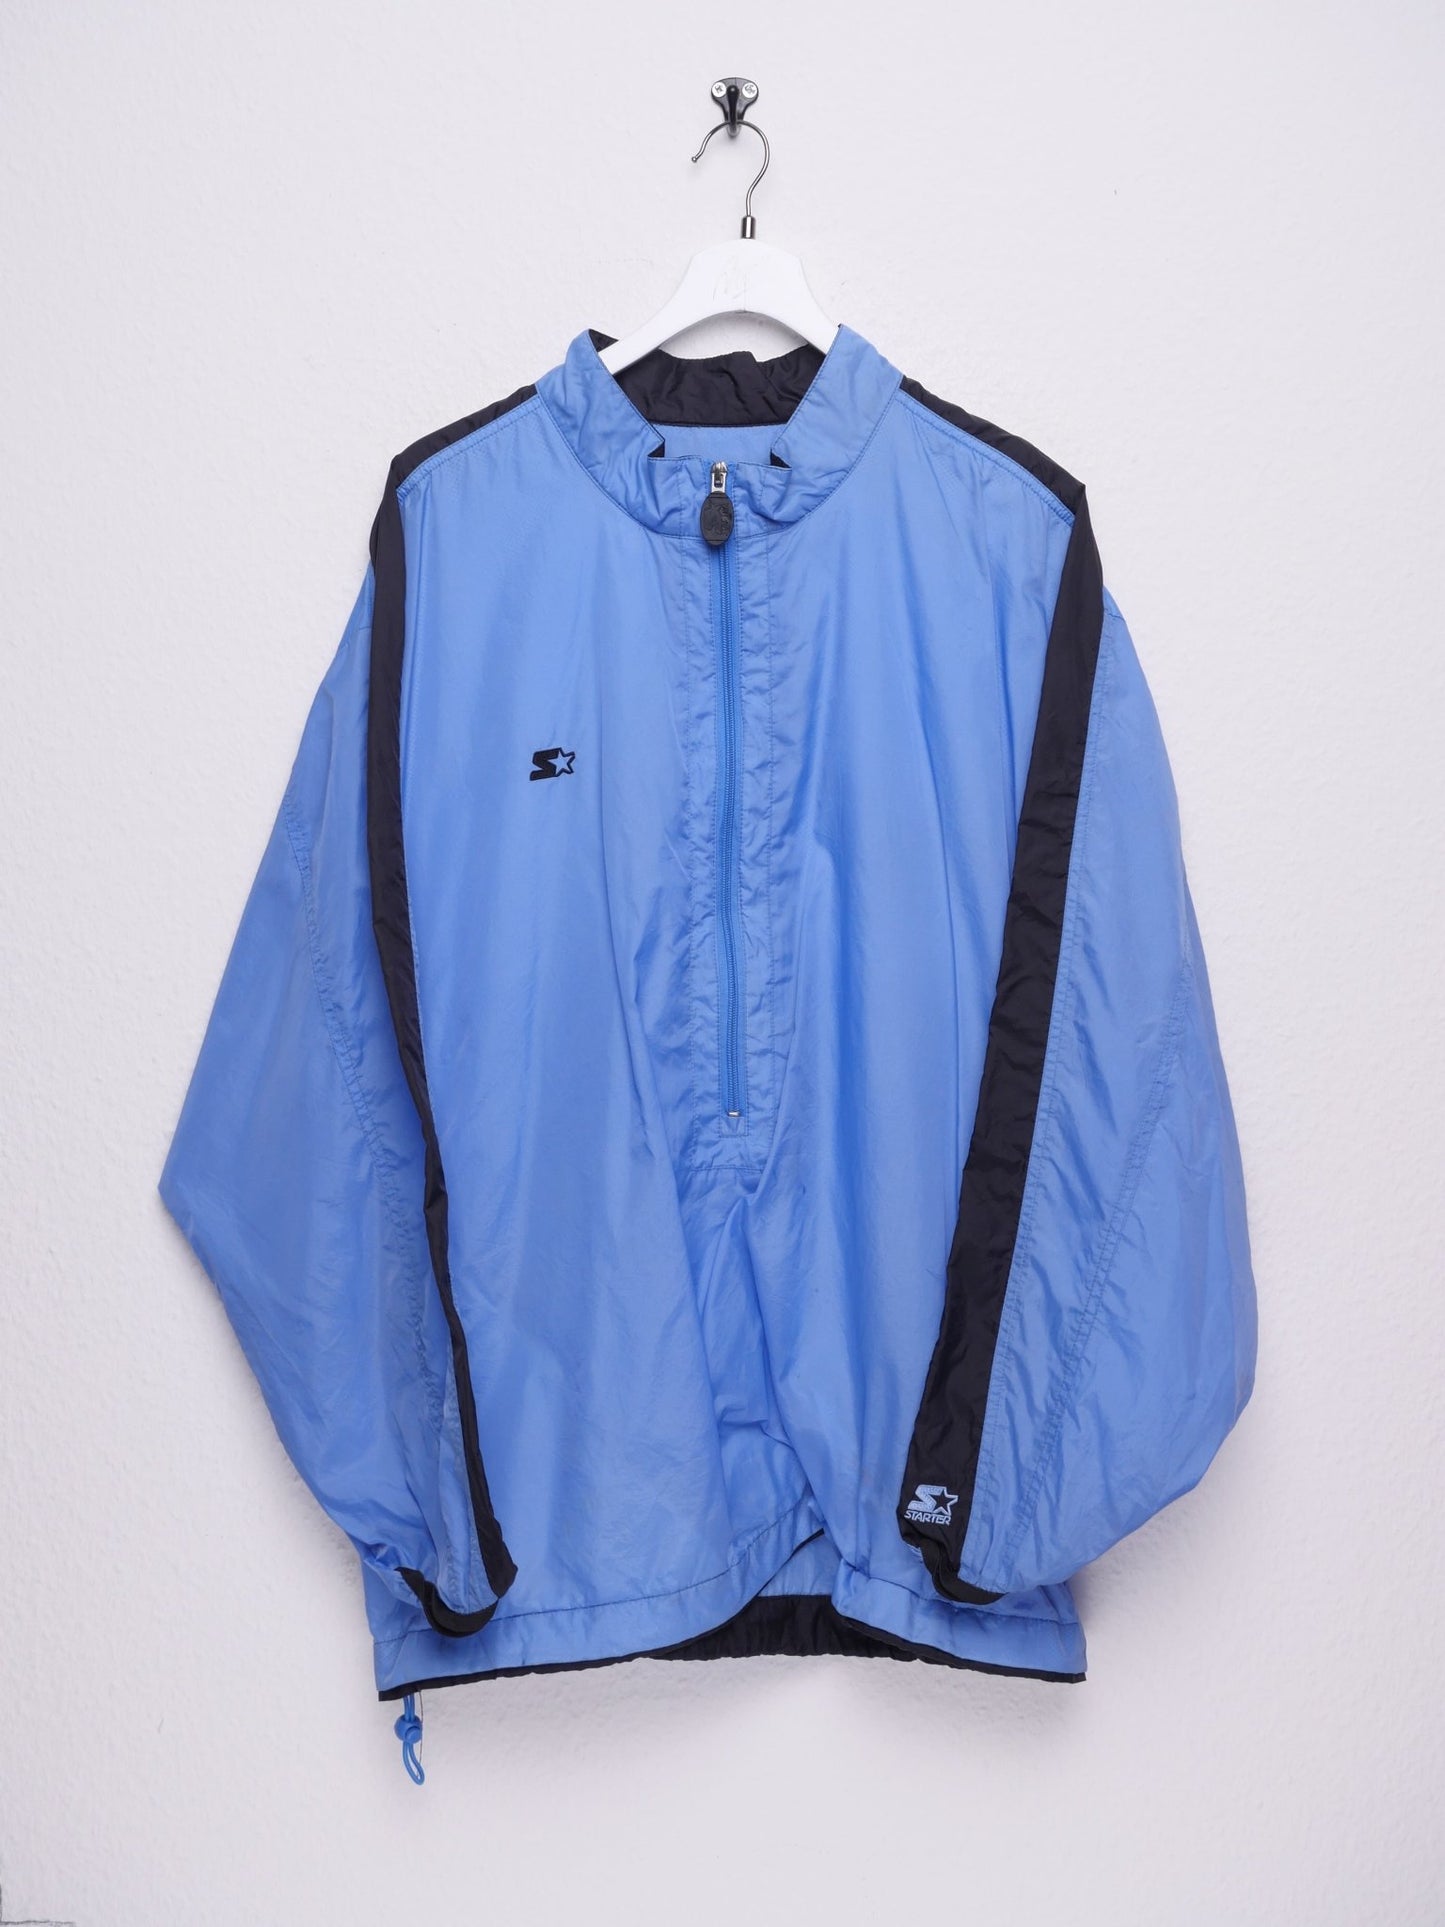 Starter embroidered Logo two toned Windbreaker Track Jacket - Peeces